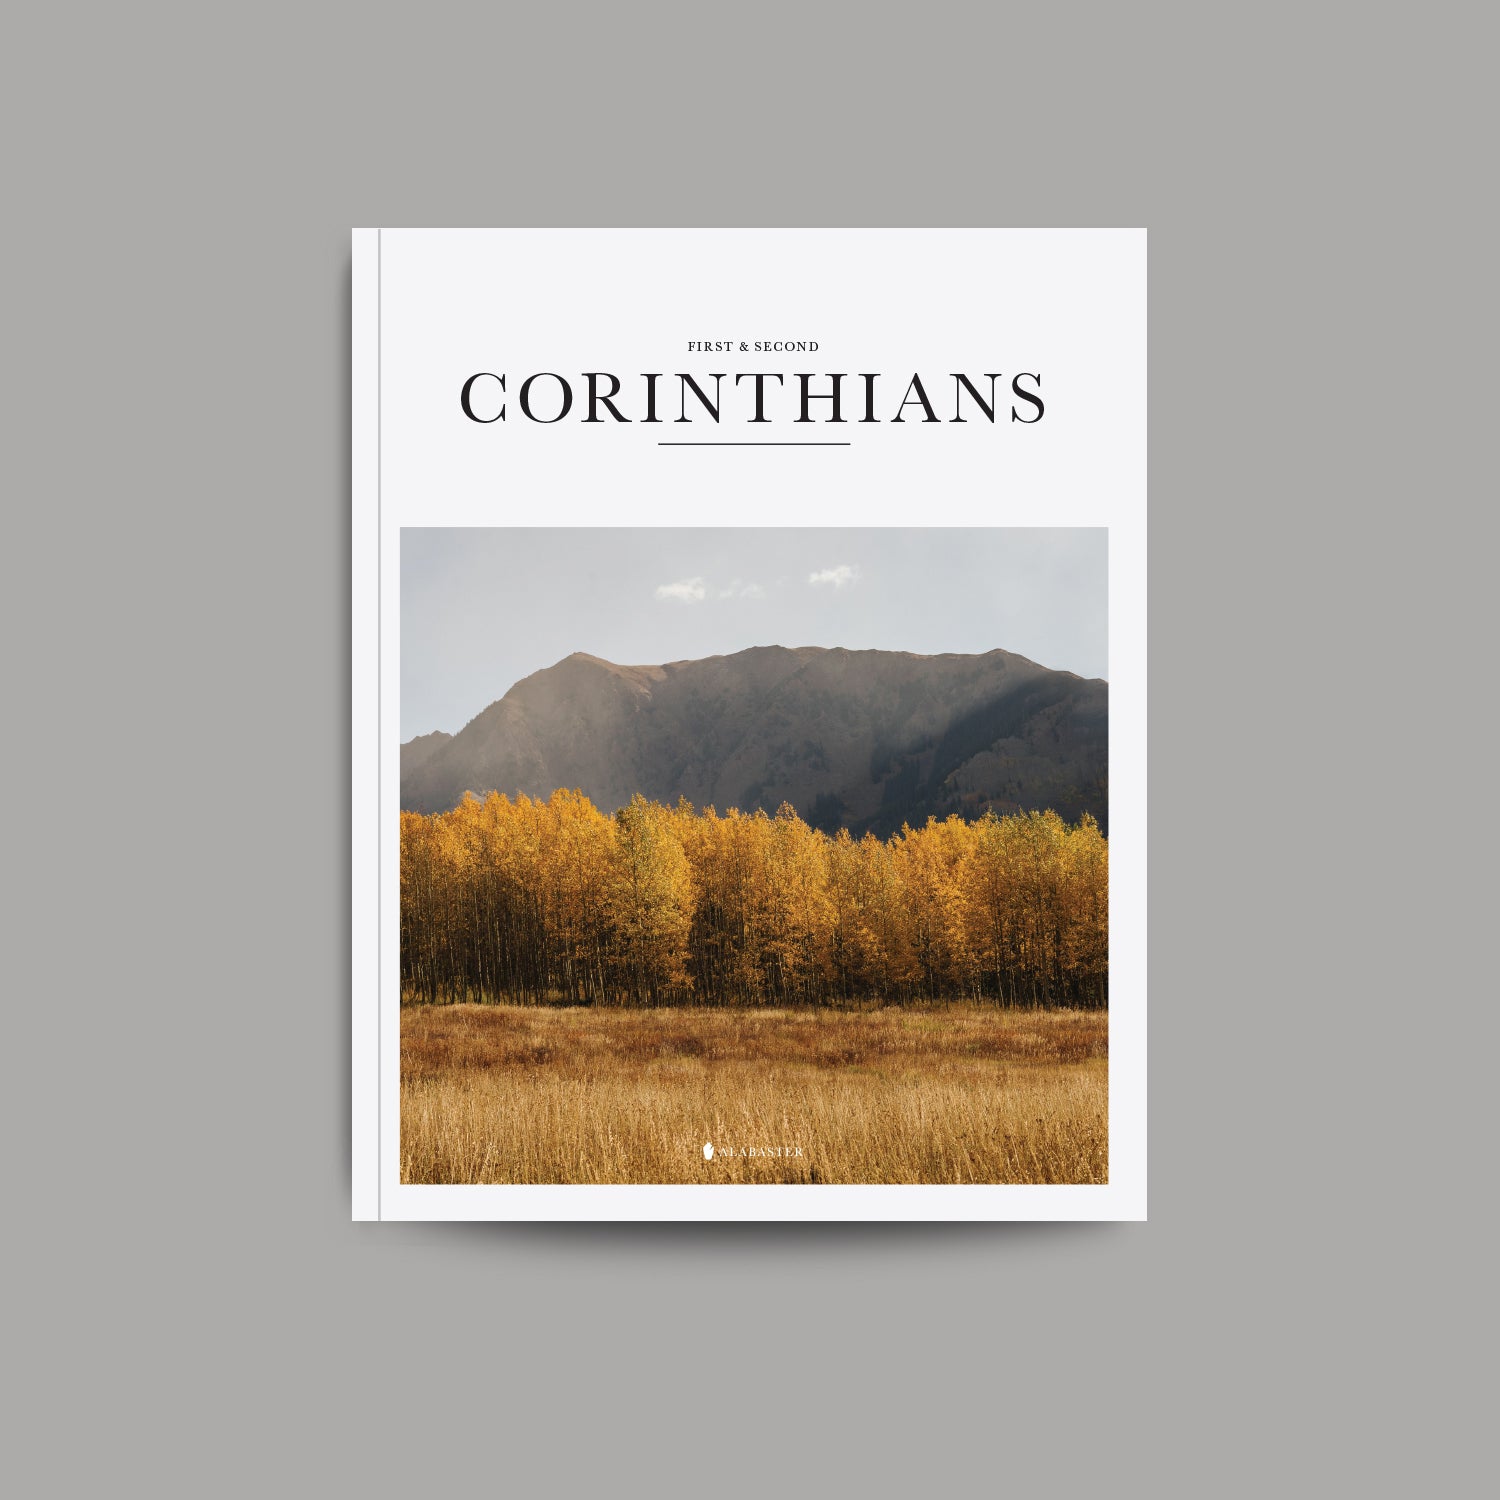 The book of first and second corinthians softcover cover